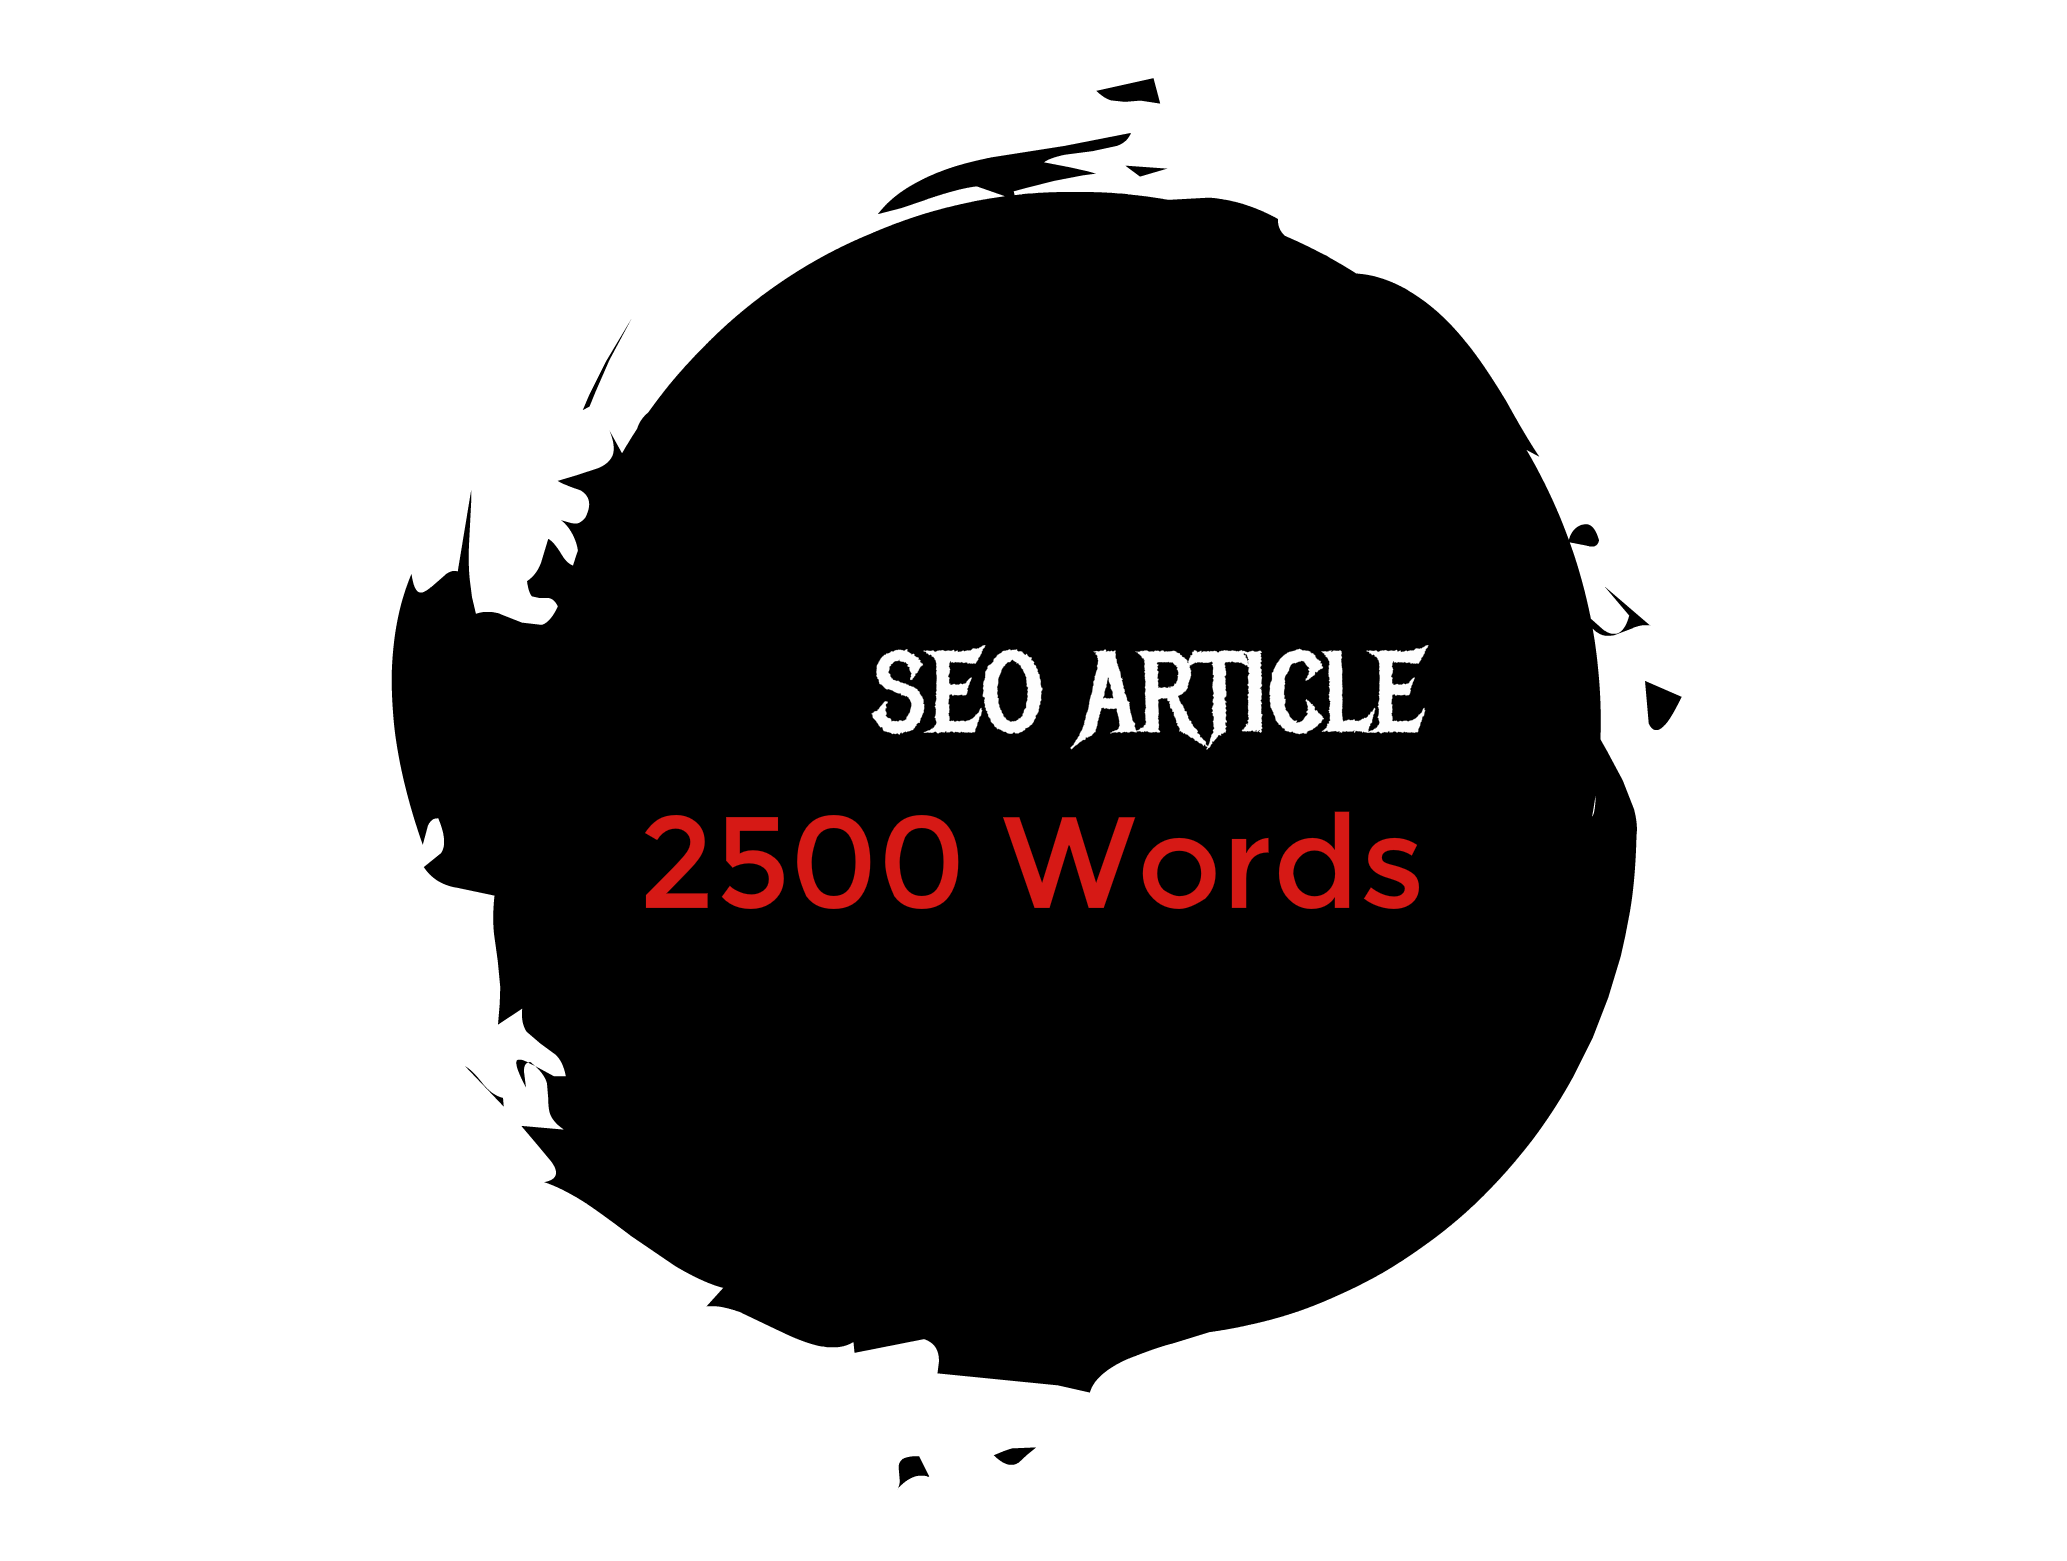 SEO Article 2500 Words